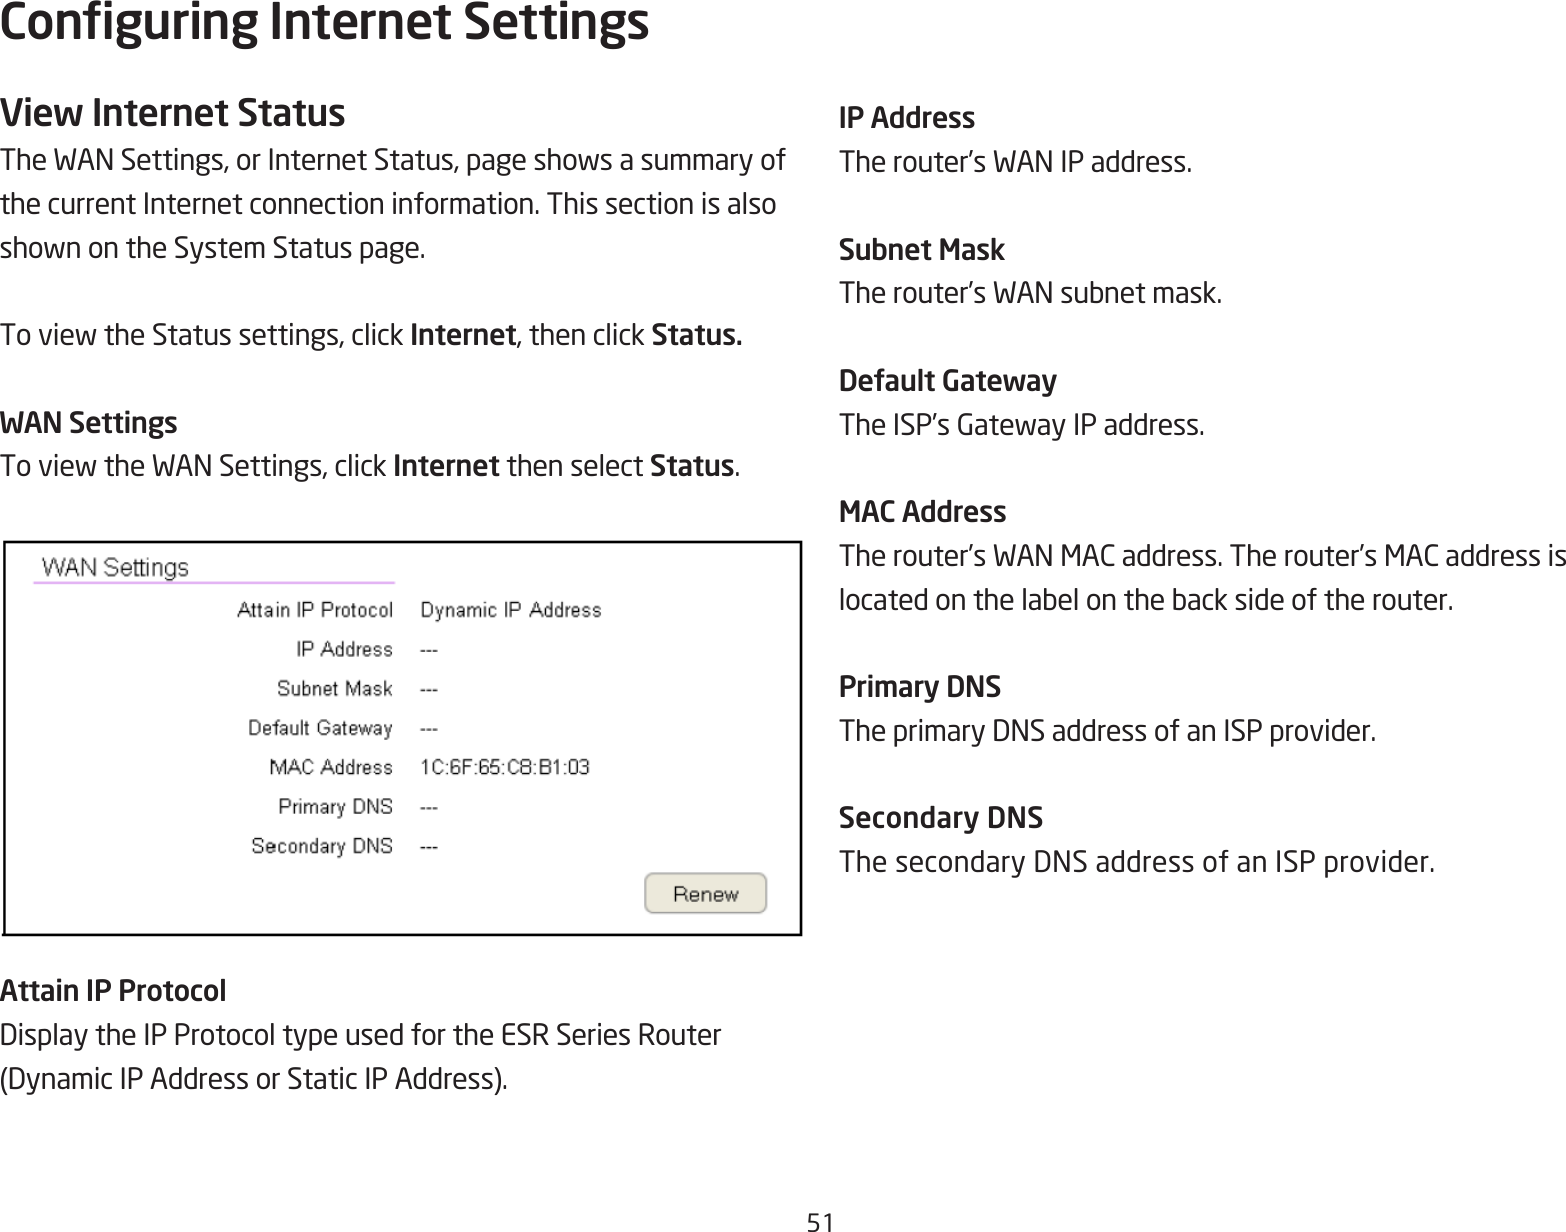 51Conguring Internet SettingsView Internet StatusTheWANSettings,orInternetStatus,pageshowsasummaryofthe current Internet connection information. This section is alsoshownontheSystemStatuspage.ToviewtheStatussettings,clickInternet, then click Status.WAN SettingsToviewtheWANSettings,clickInternet then select Status.Attain IP ProtocolDisplaytheIPProtocoltypeusedfortheESRSeriesRouter(DynamicIPAddressorStaticIPAddress).IP AddressTherouter’sWANIPaddress.Subnet MaskTherouter’sWANsubnetmask.Default GatewayTheISP’sGatewayIPaddress.MAC AddressTherouter’sWANMACaddress.Therouter’sMACaddressislocatedonthelabelonthebacksideoftherouter.Primary DNSTheprimaryDNSaddressofanISPprovider.Secondary DNSThesecondaryDNSaddressofanISPprovider.